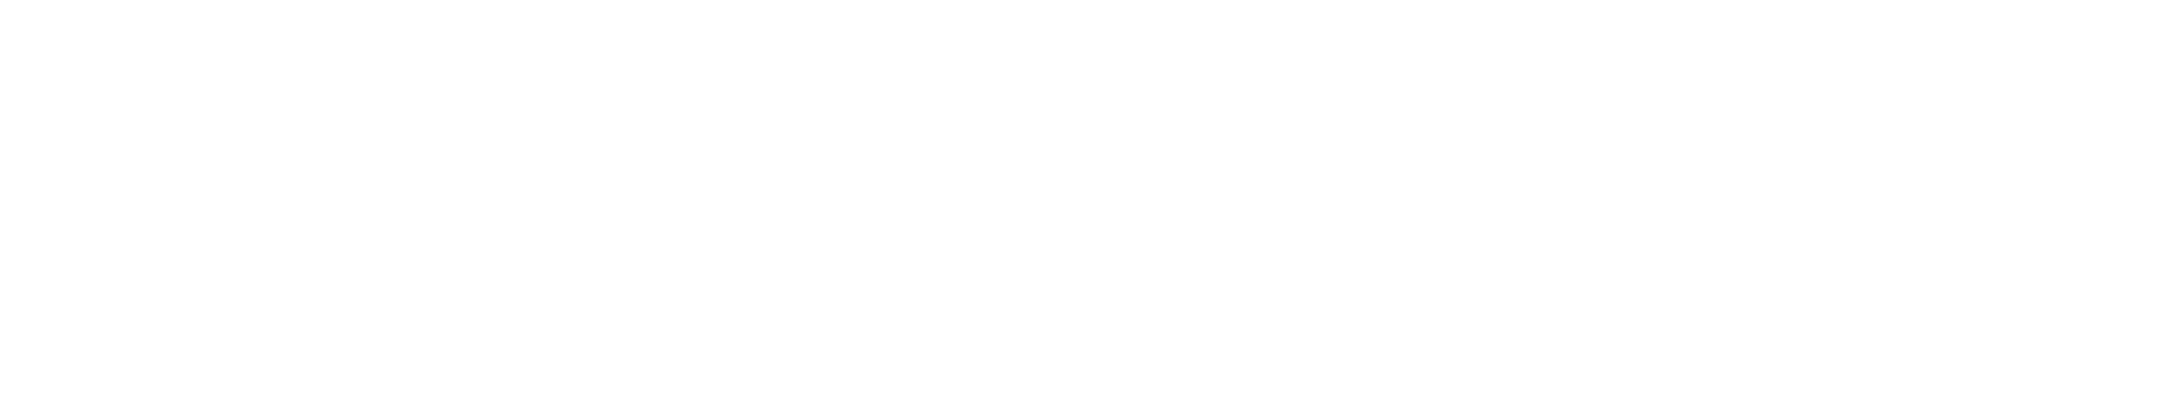 Great Pods - Podcast Critic and Reviews Blog